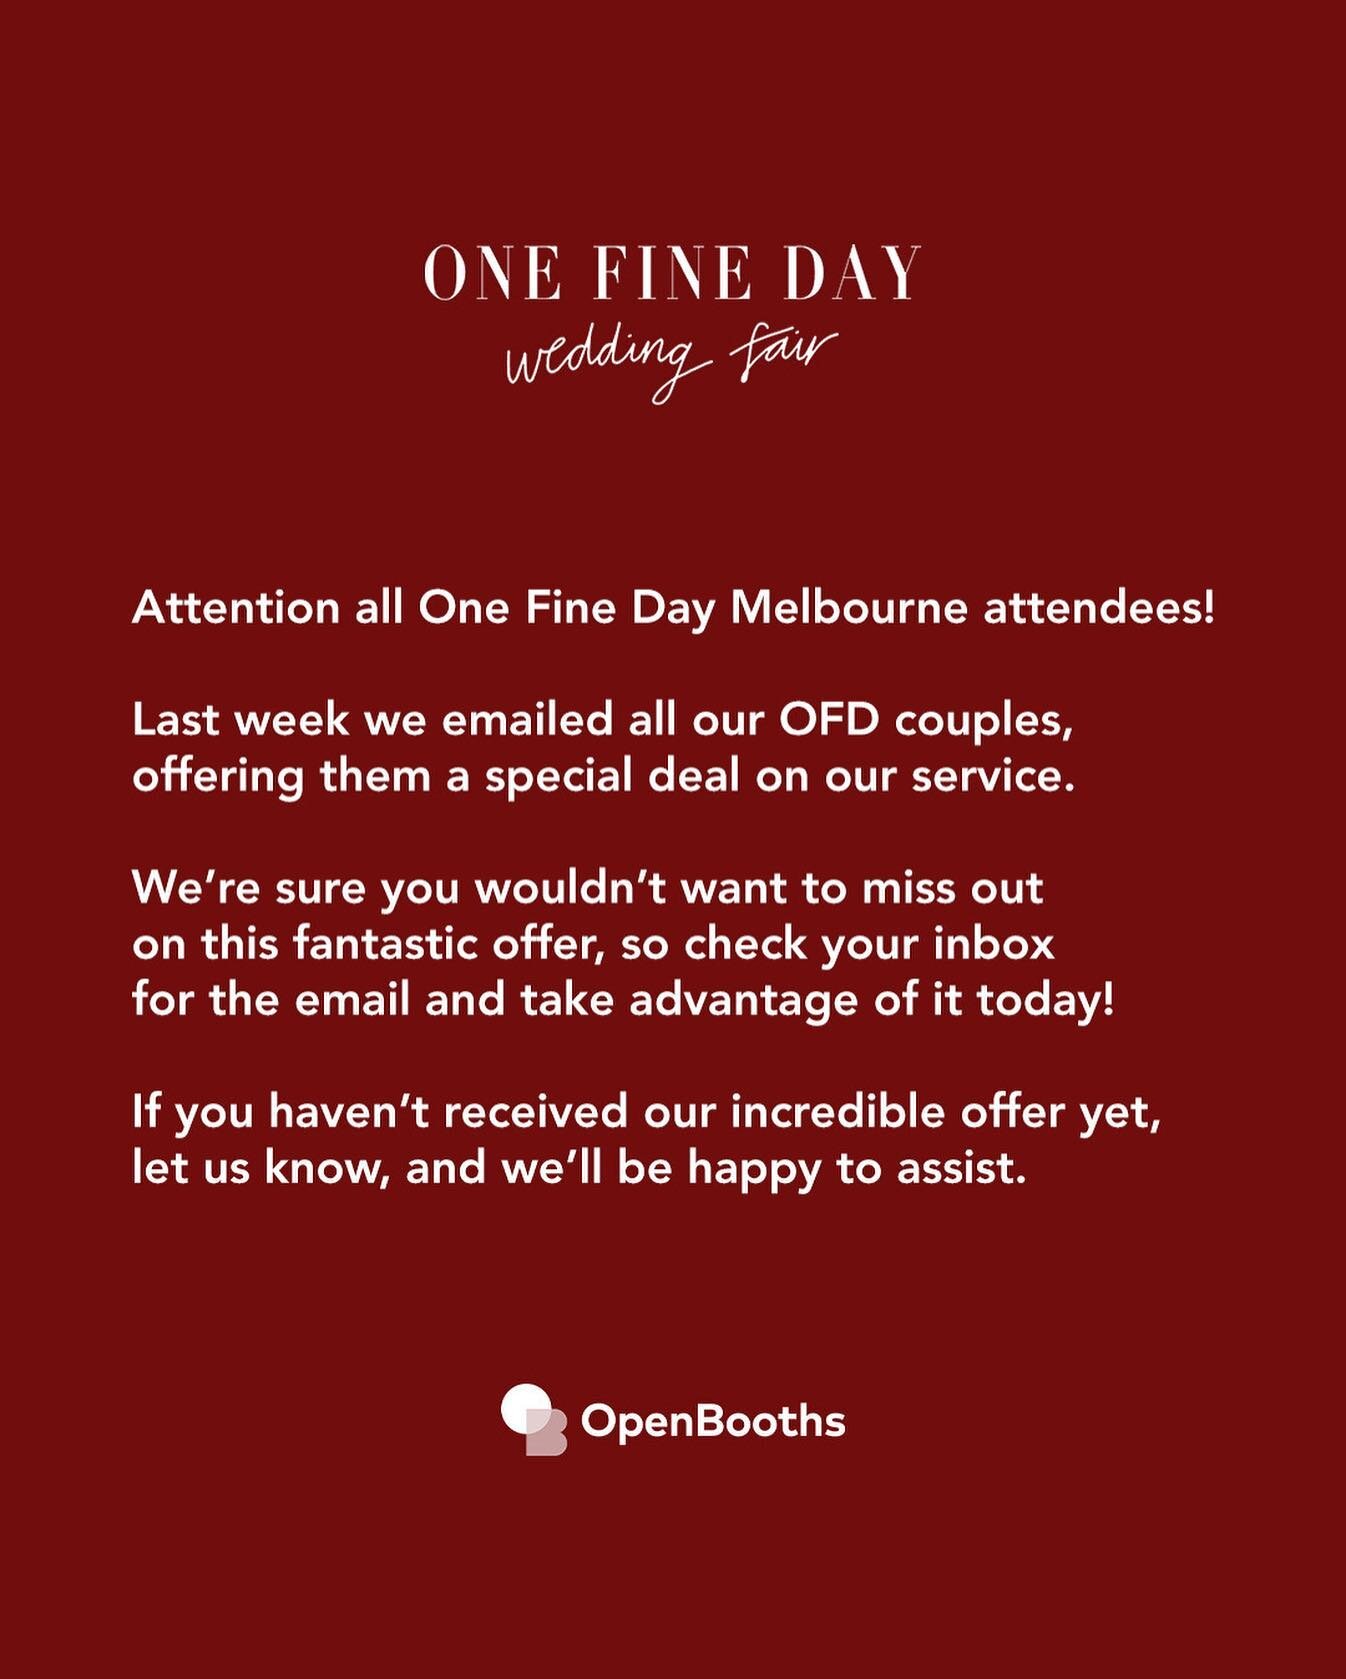 Attention all #OFD Couples: Have you checked your email 📧 lately? We sent a special offer last week just for you, so don&rsquo;t forget to check it out!⁣

We know how exciting wedding planning can be, but don&rsquo;t let this special #OpenBooths dea